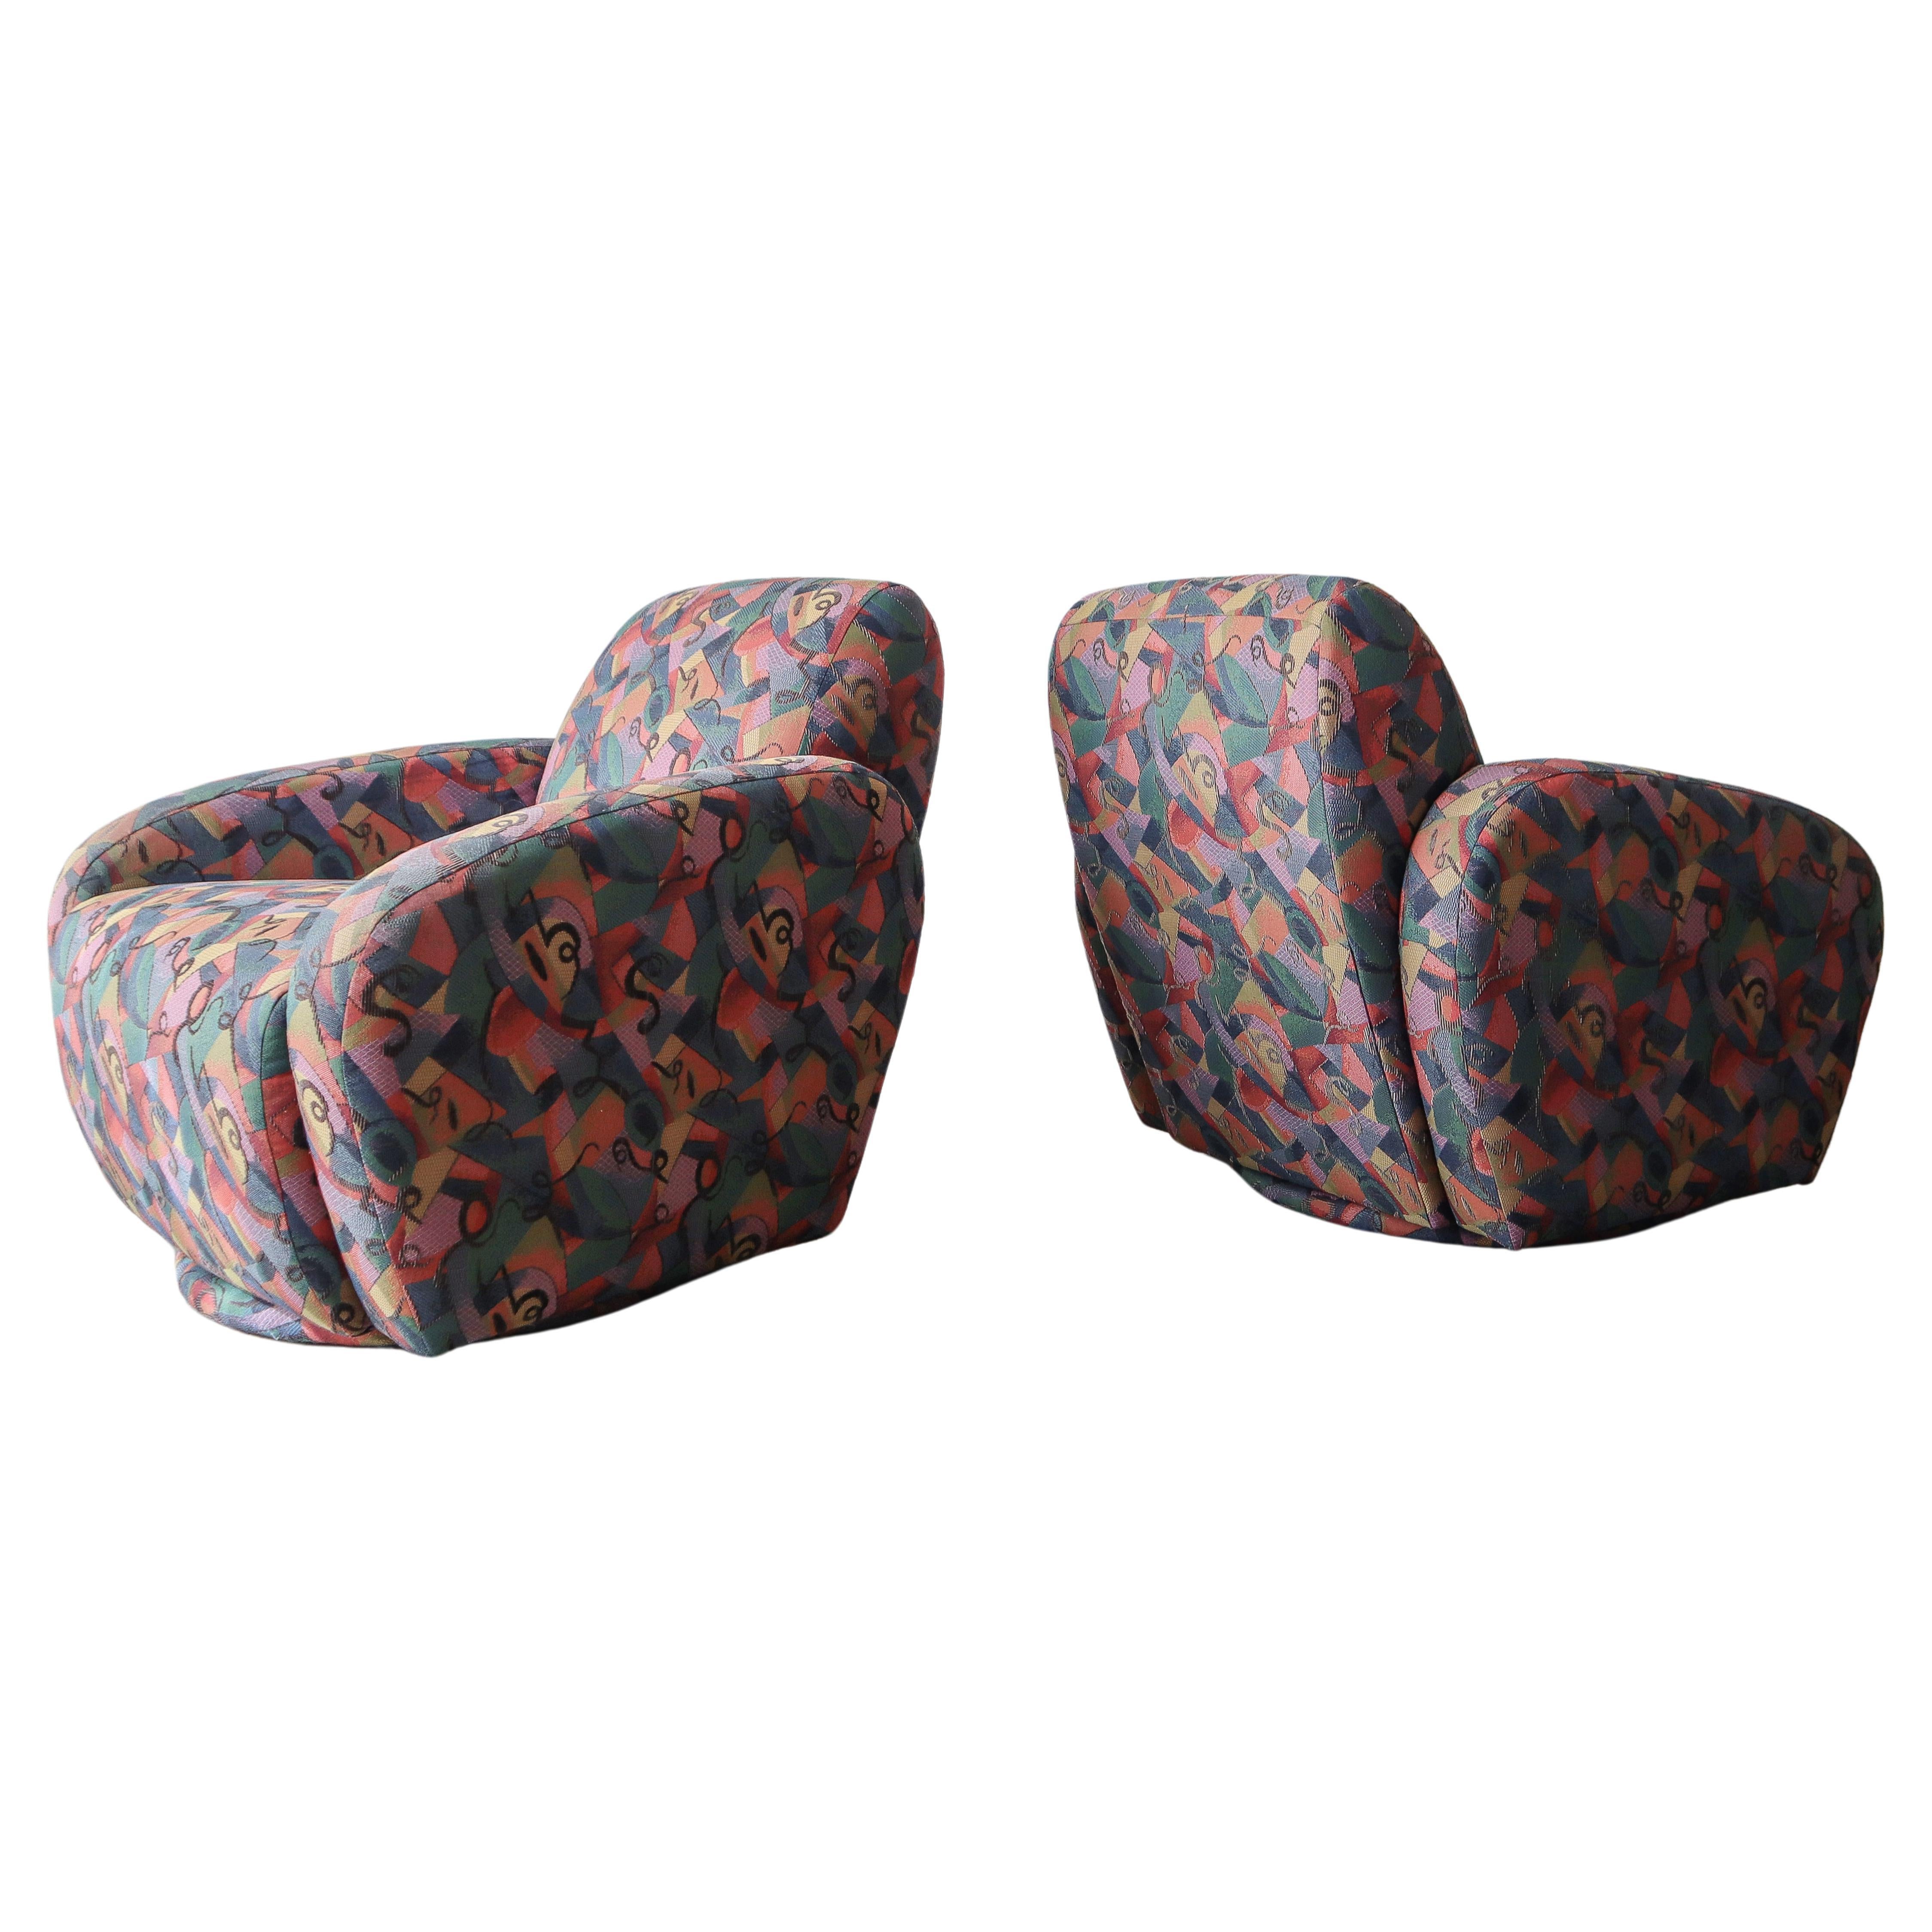 Pair of Post Modern Swivel Chairs by Preview For Sale